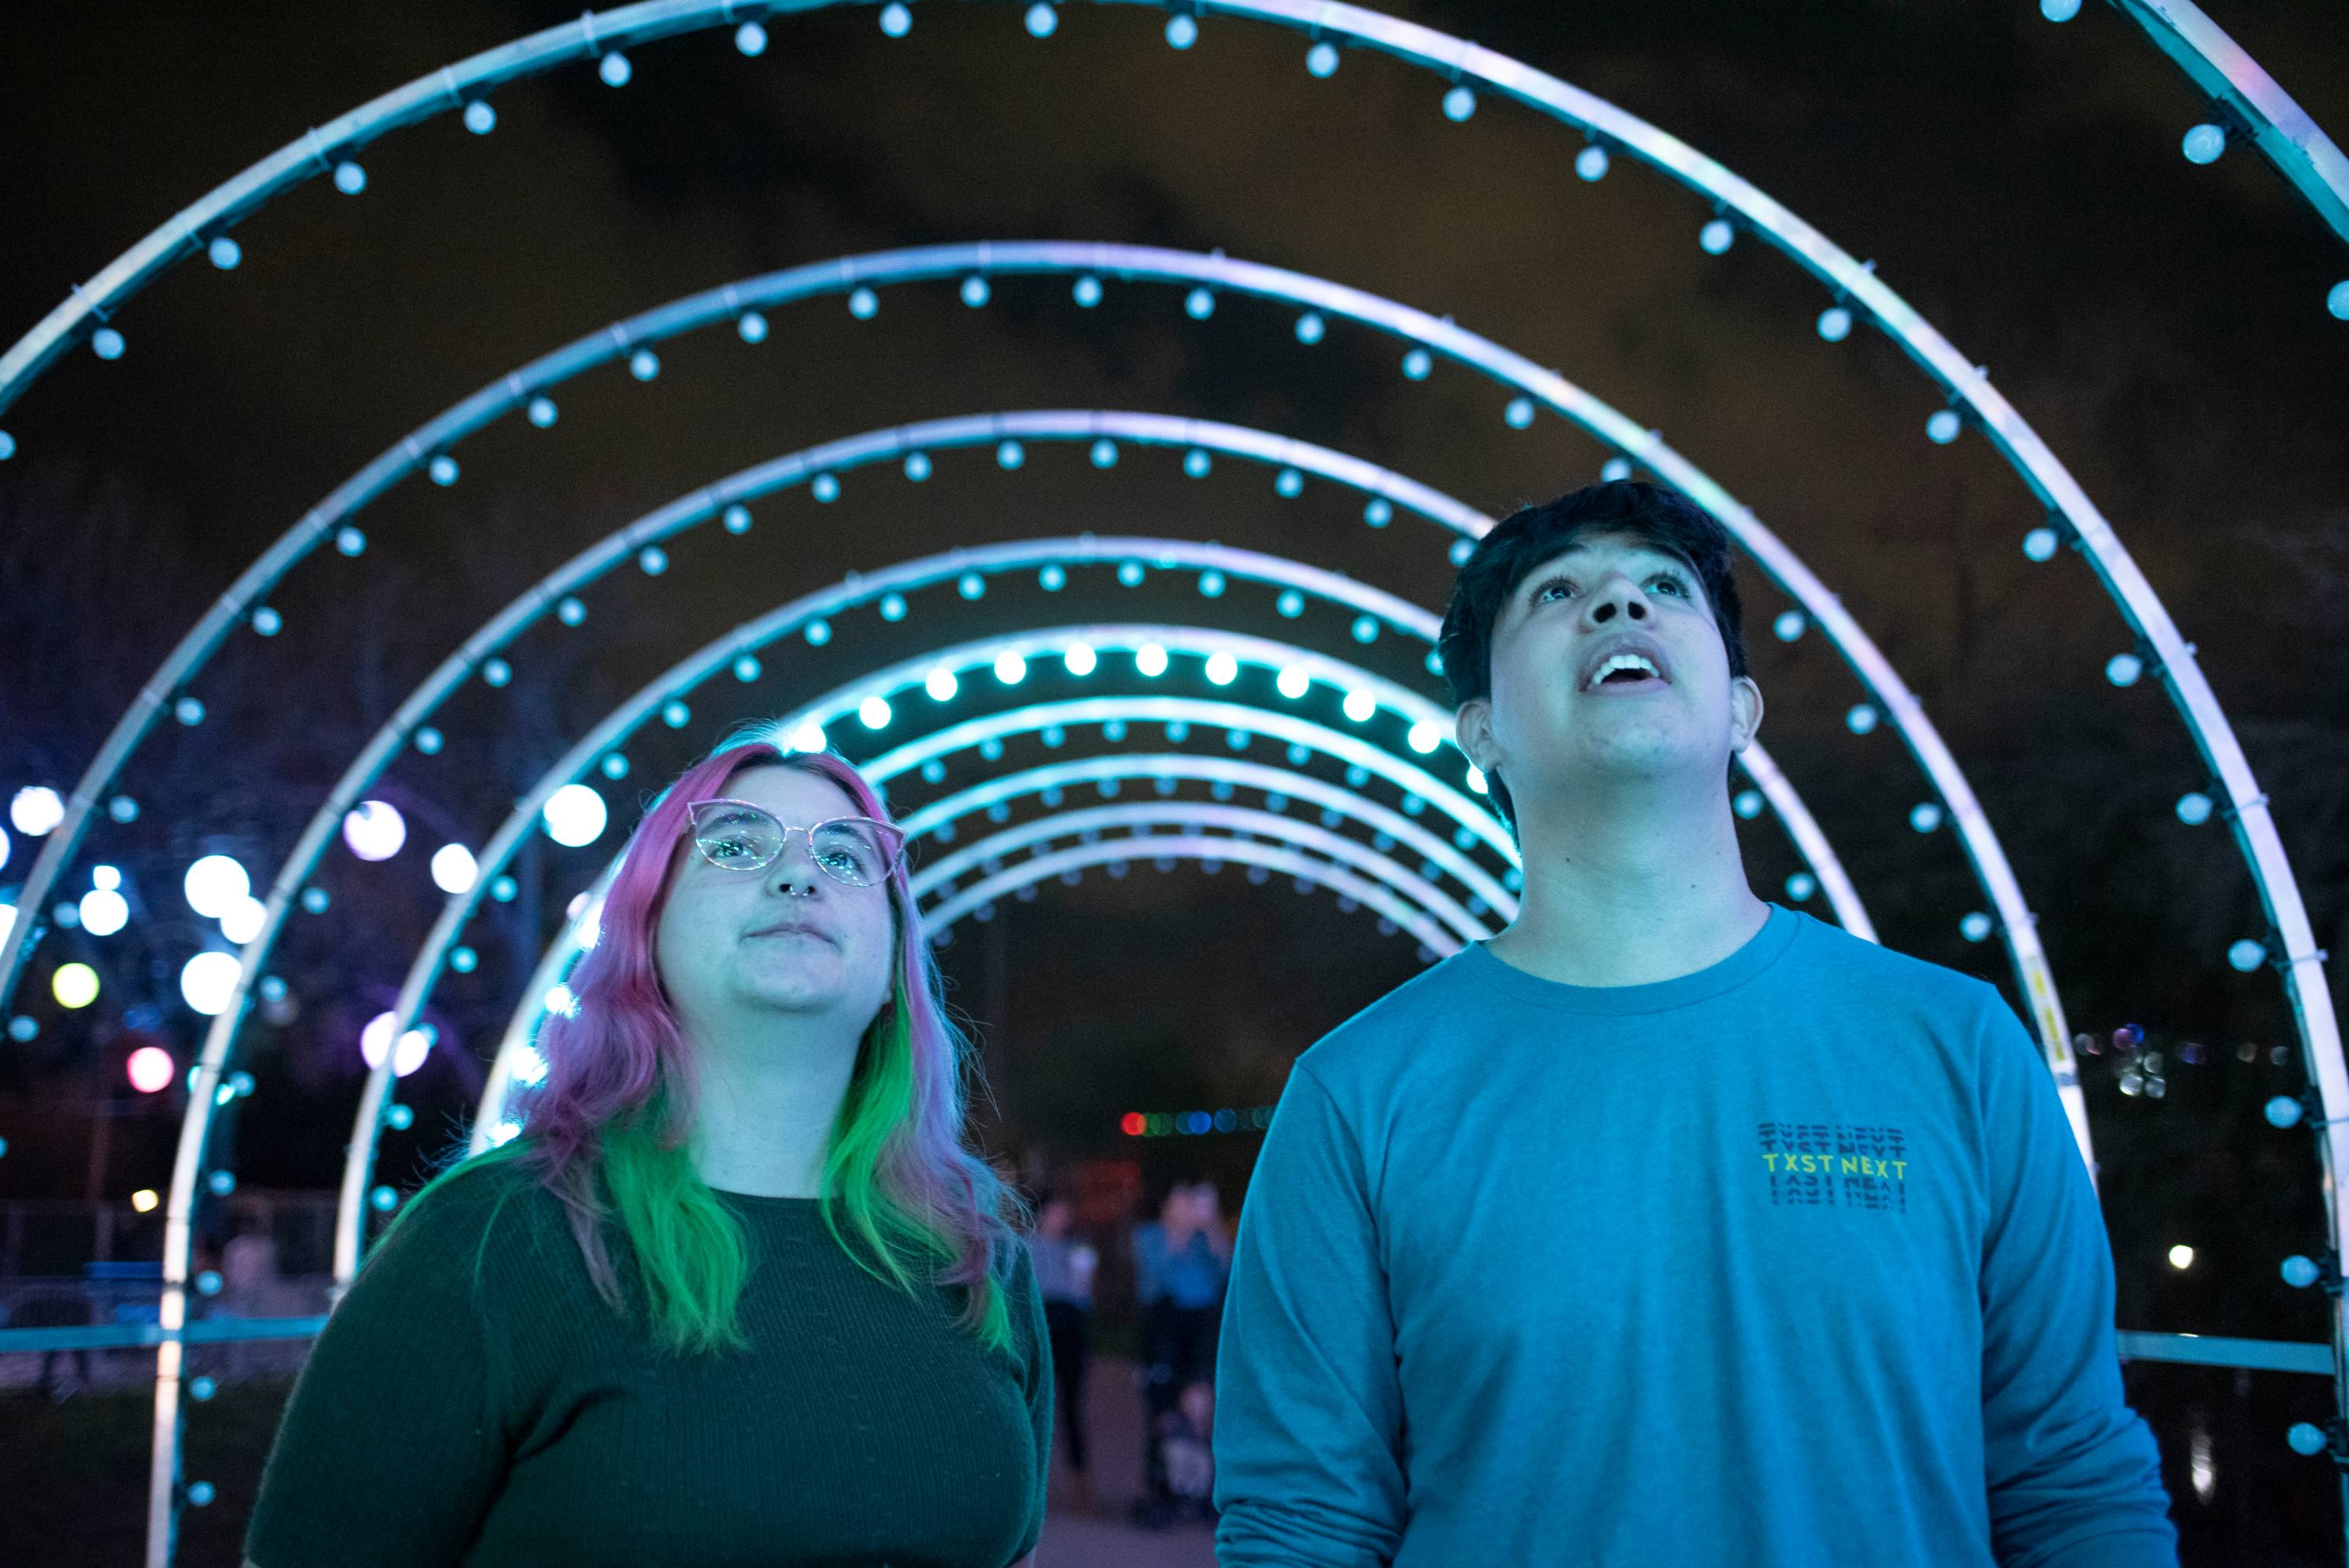 Texas state students look at multi-colored lights in awe